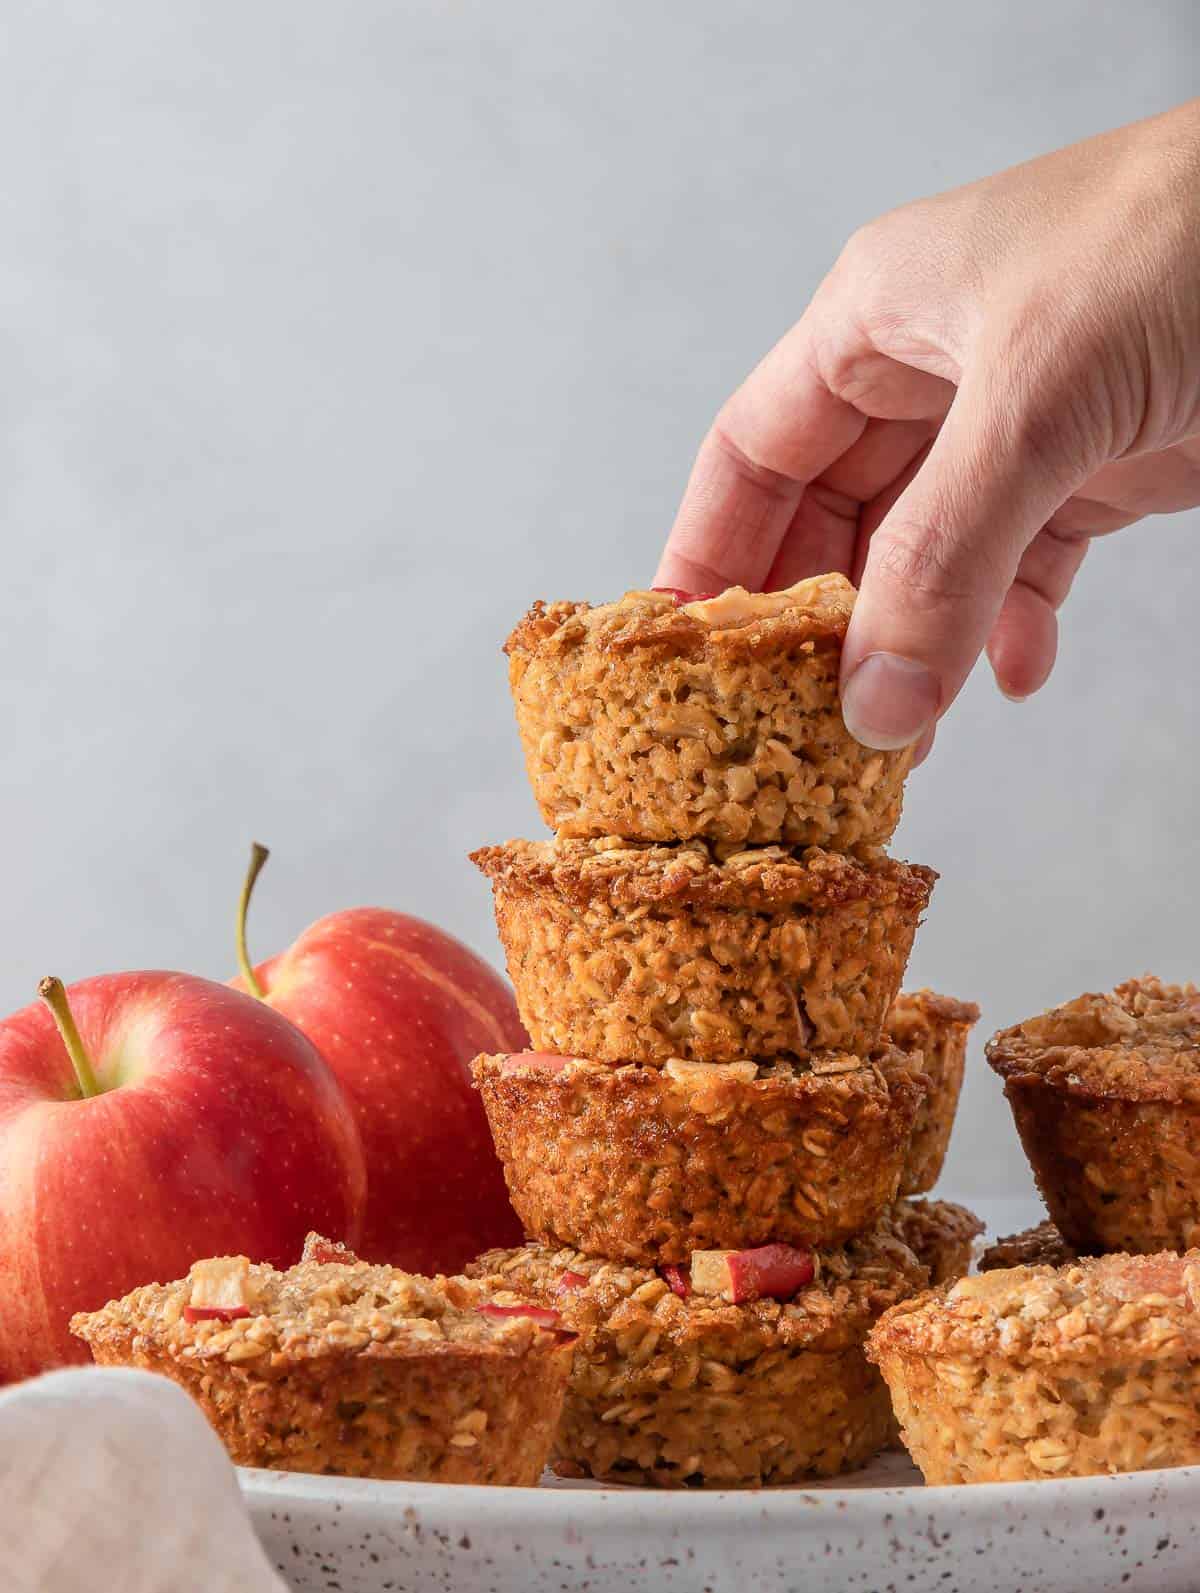 Cinnamon baked apple oats cups stacked on top of each other on a plate.